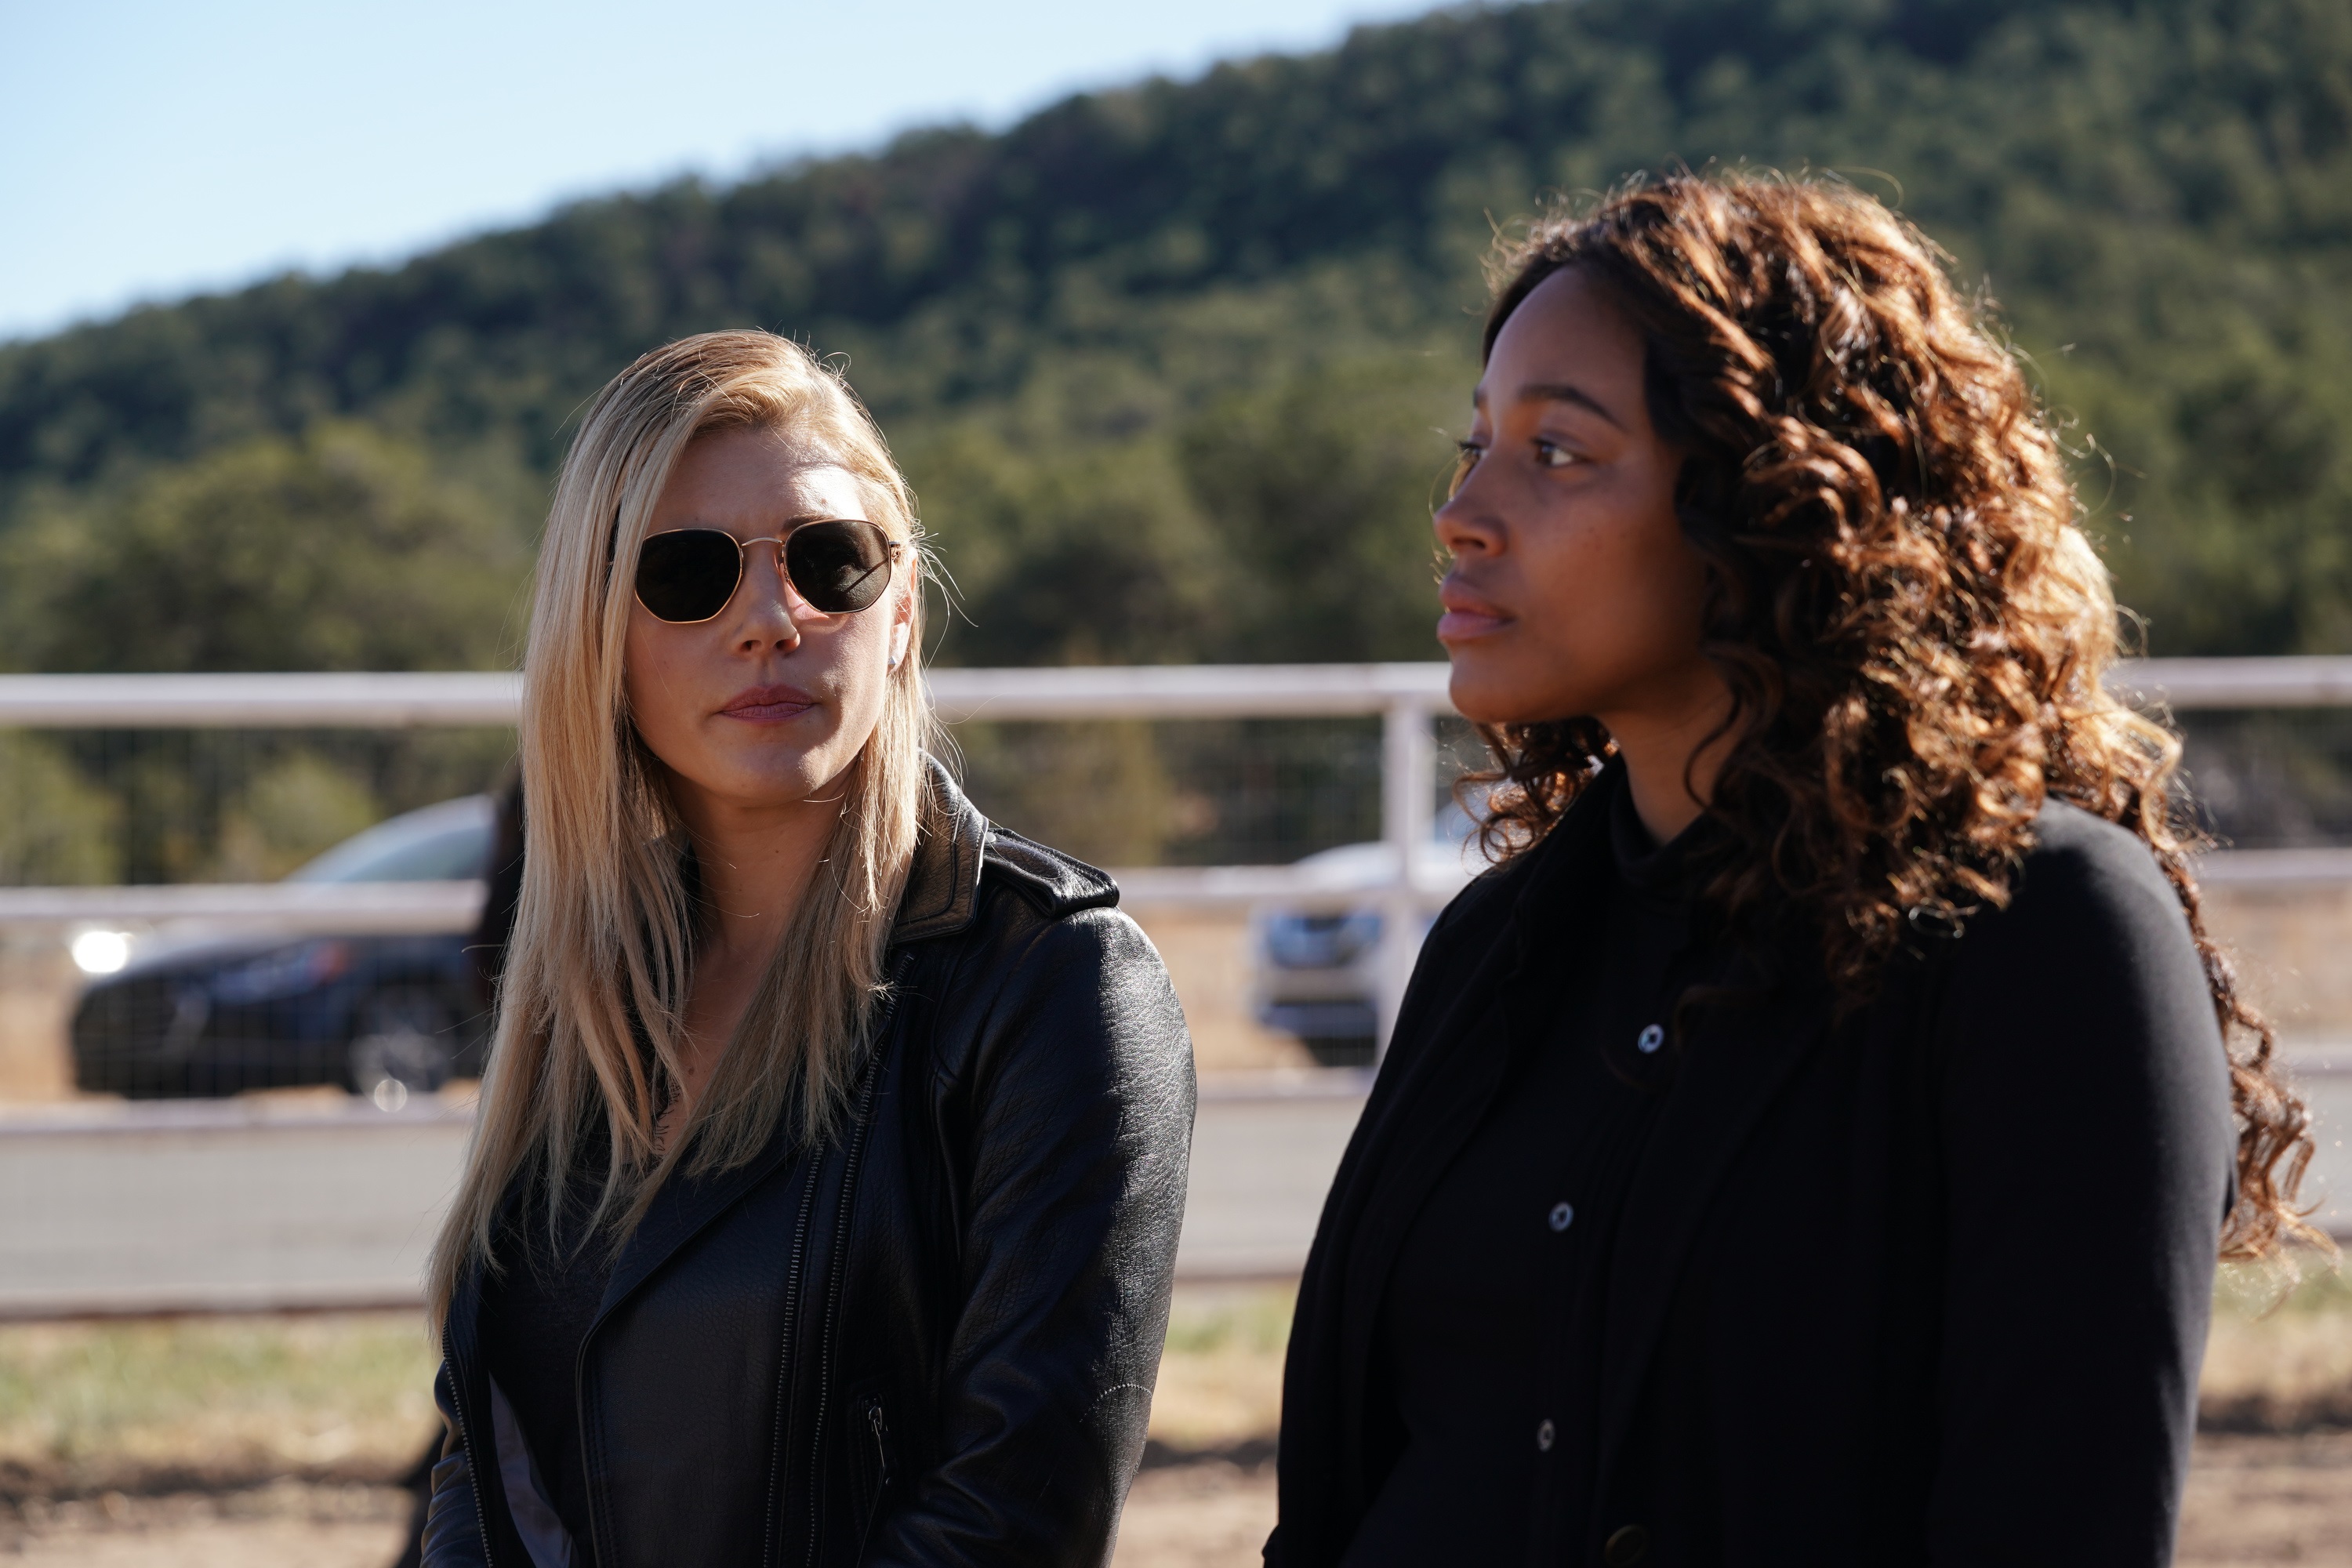 Katheryn Winnick and Kylie Bunbury stand next to each other as Jenny and Cassie in 'Big Sky' Season 2